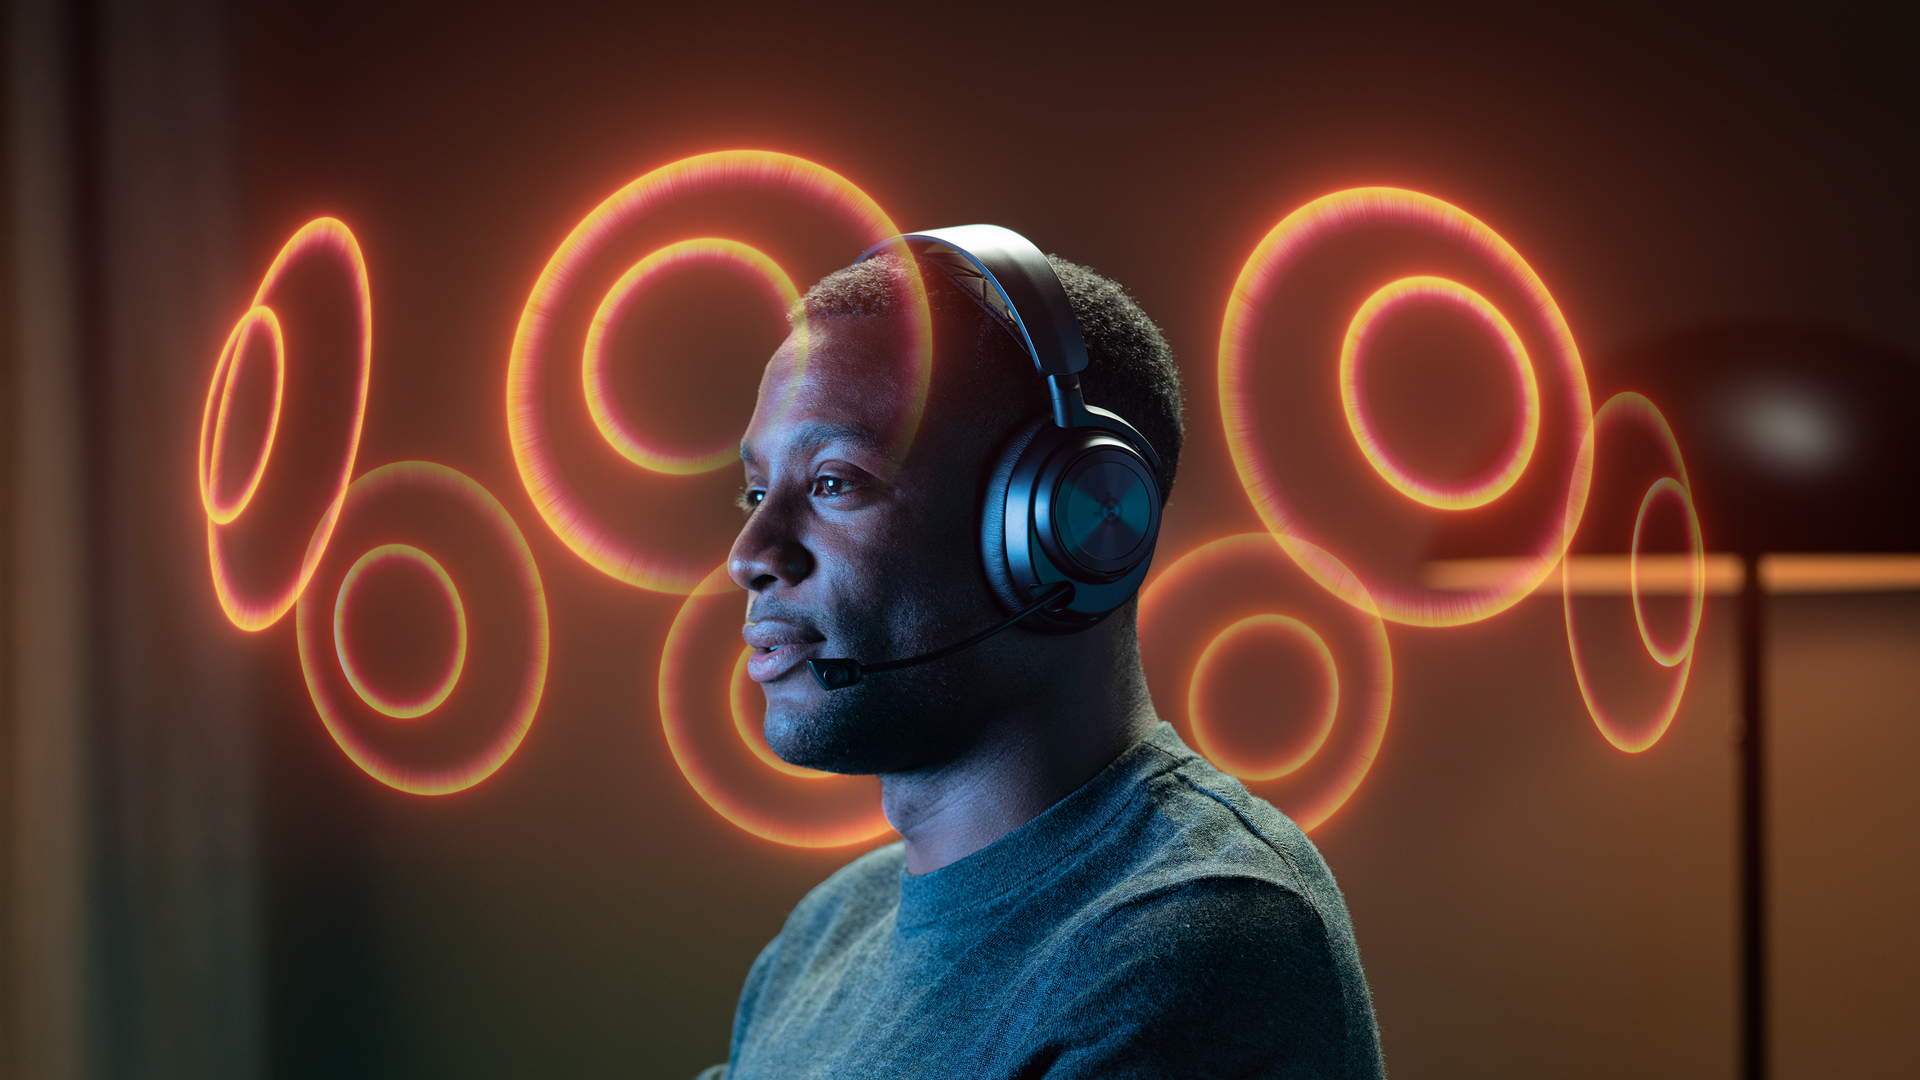 A person wearing an Arctis Nova headset with abstract orbs hovering around them to illustrate spatial audio.